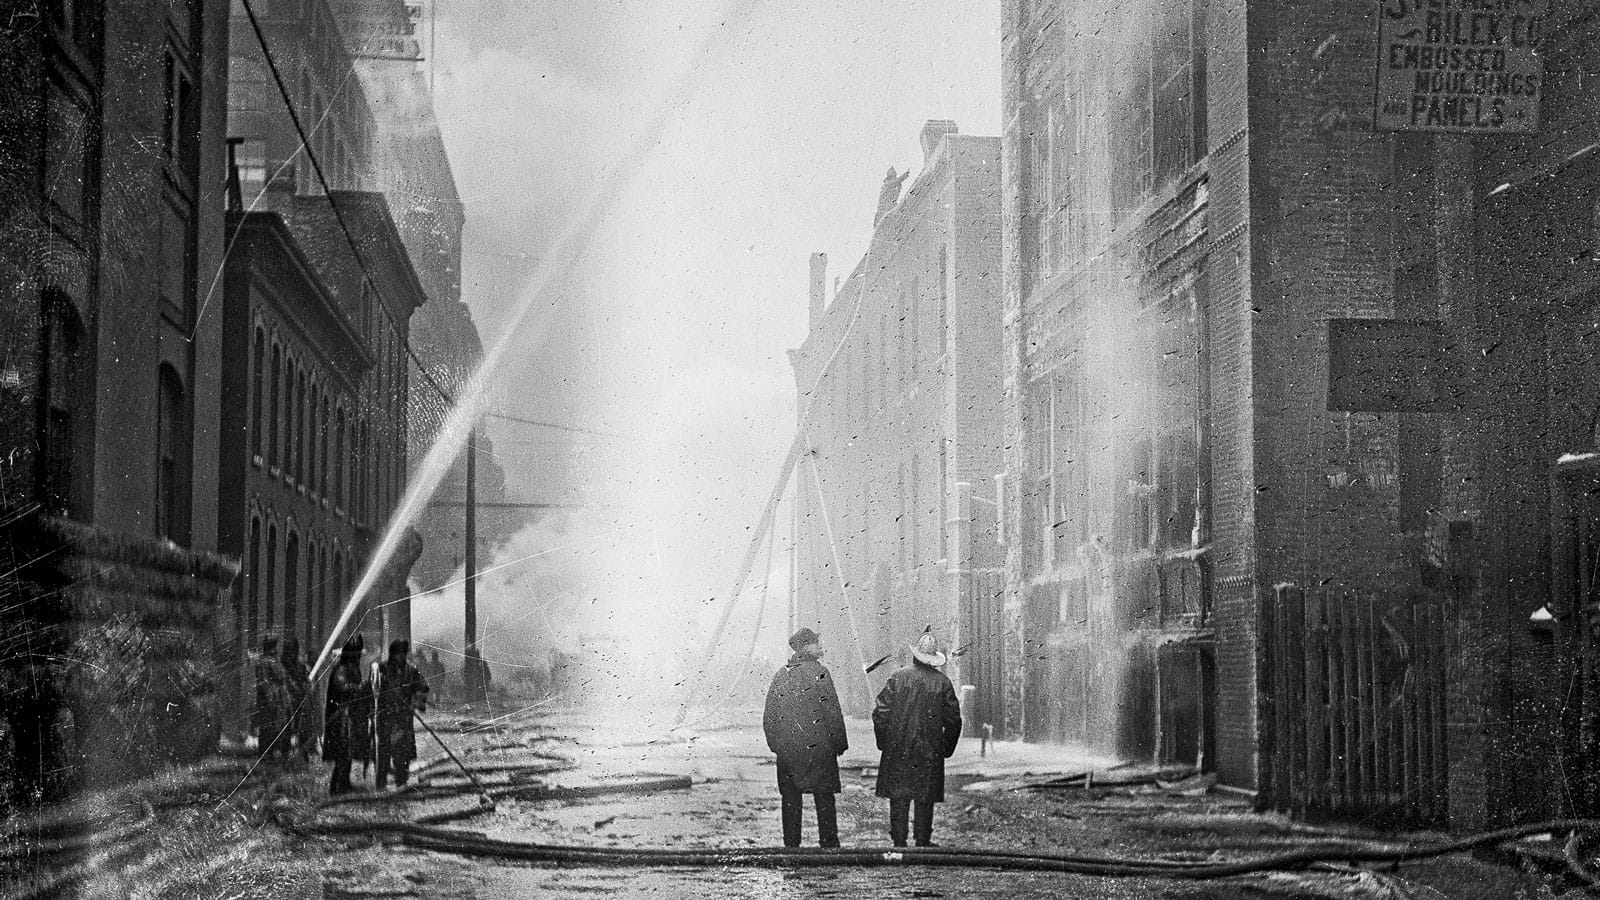 Firemen spray water at the Iroquois Theater Fire to extinguish the blaze